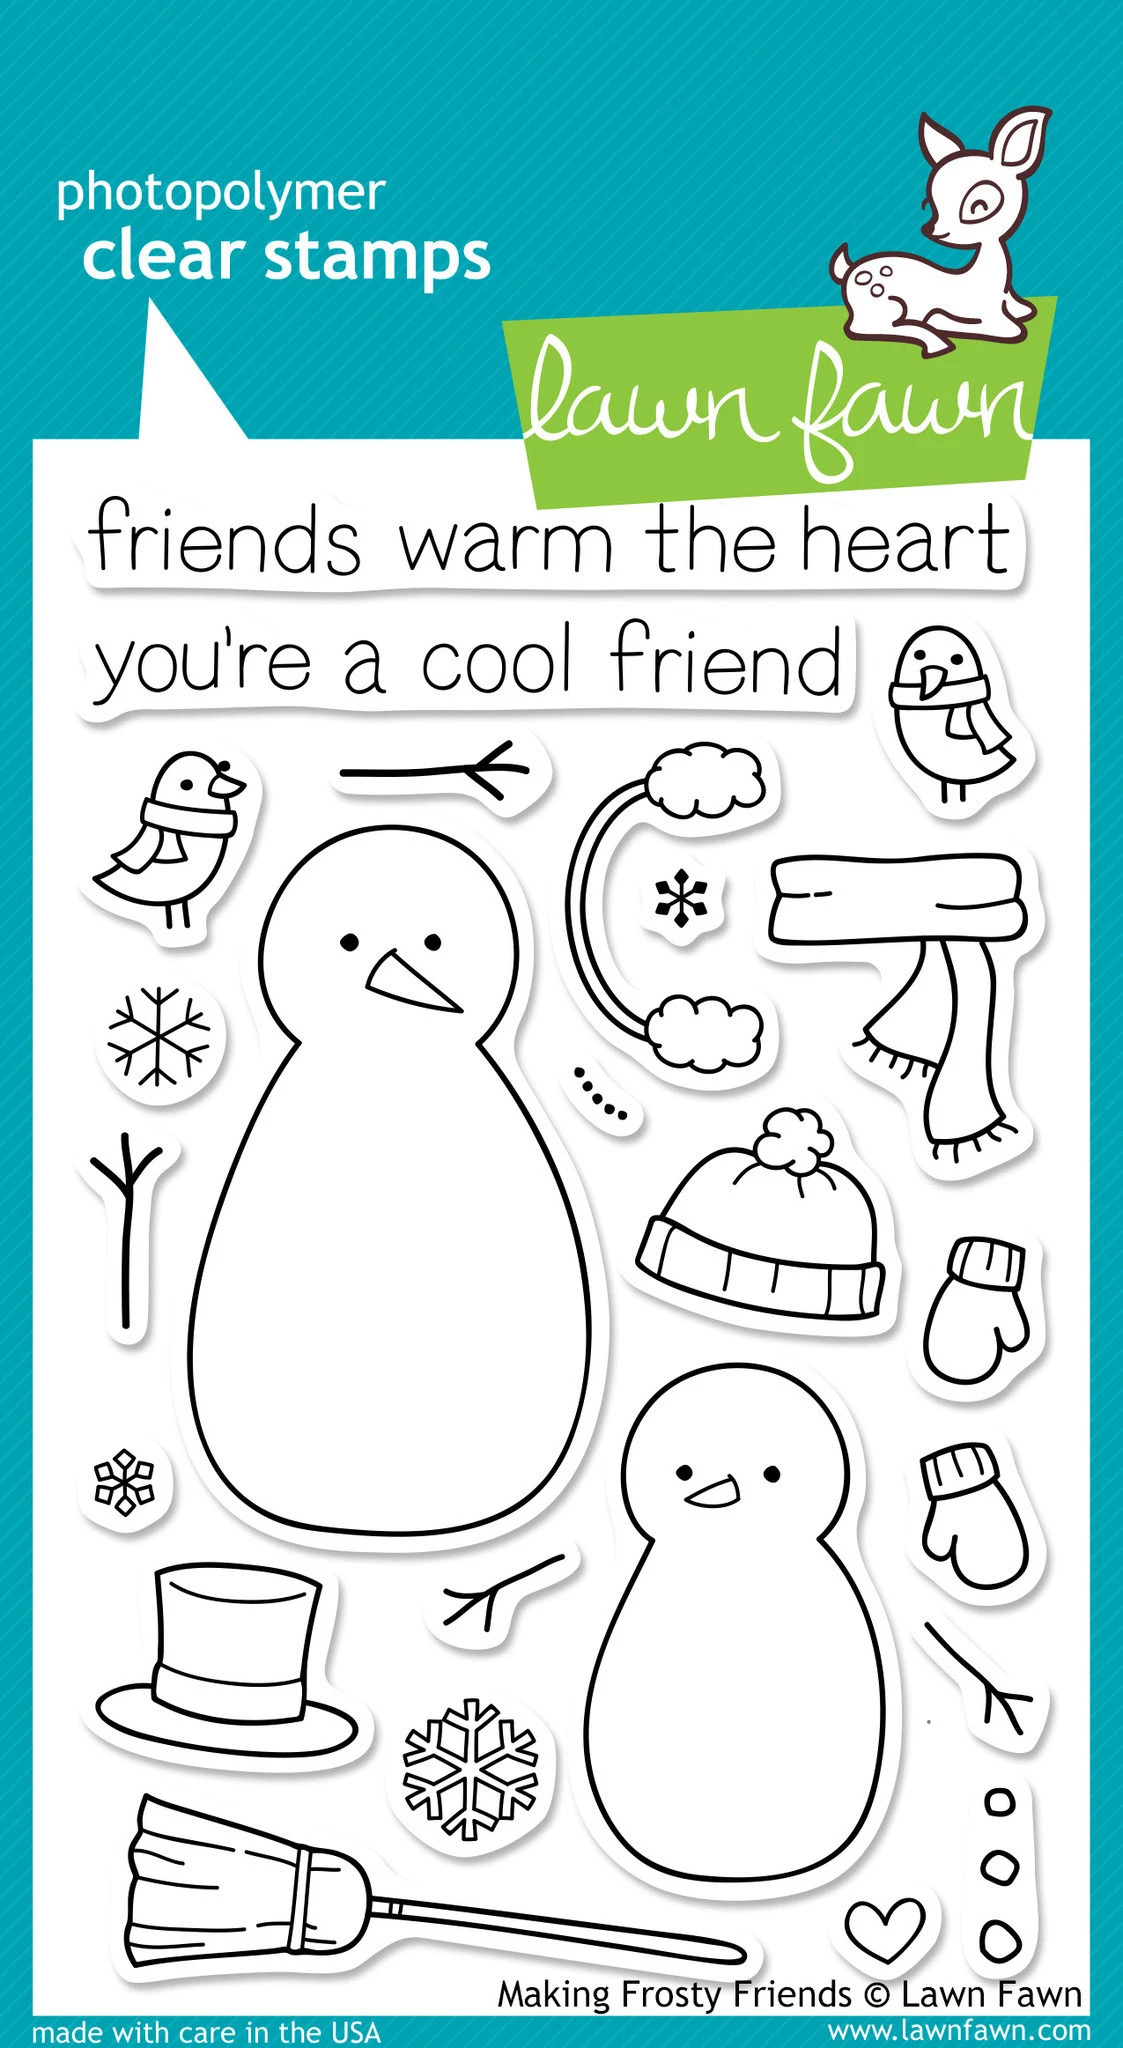 Making Frosty Friends stamps